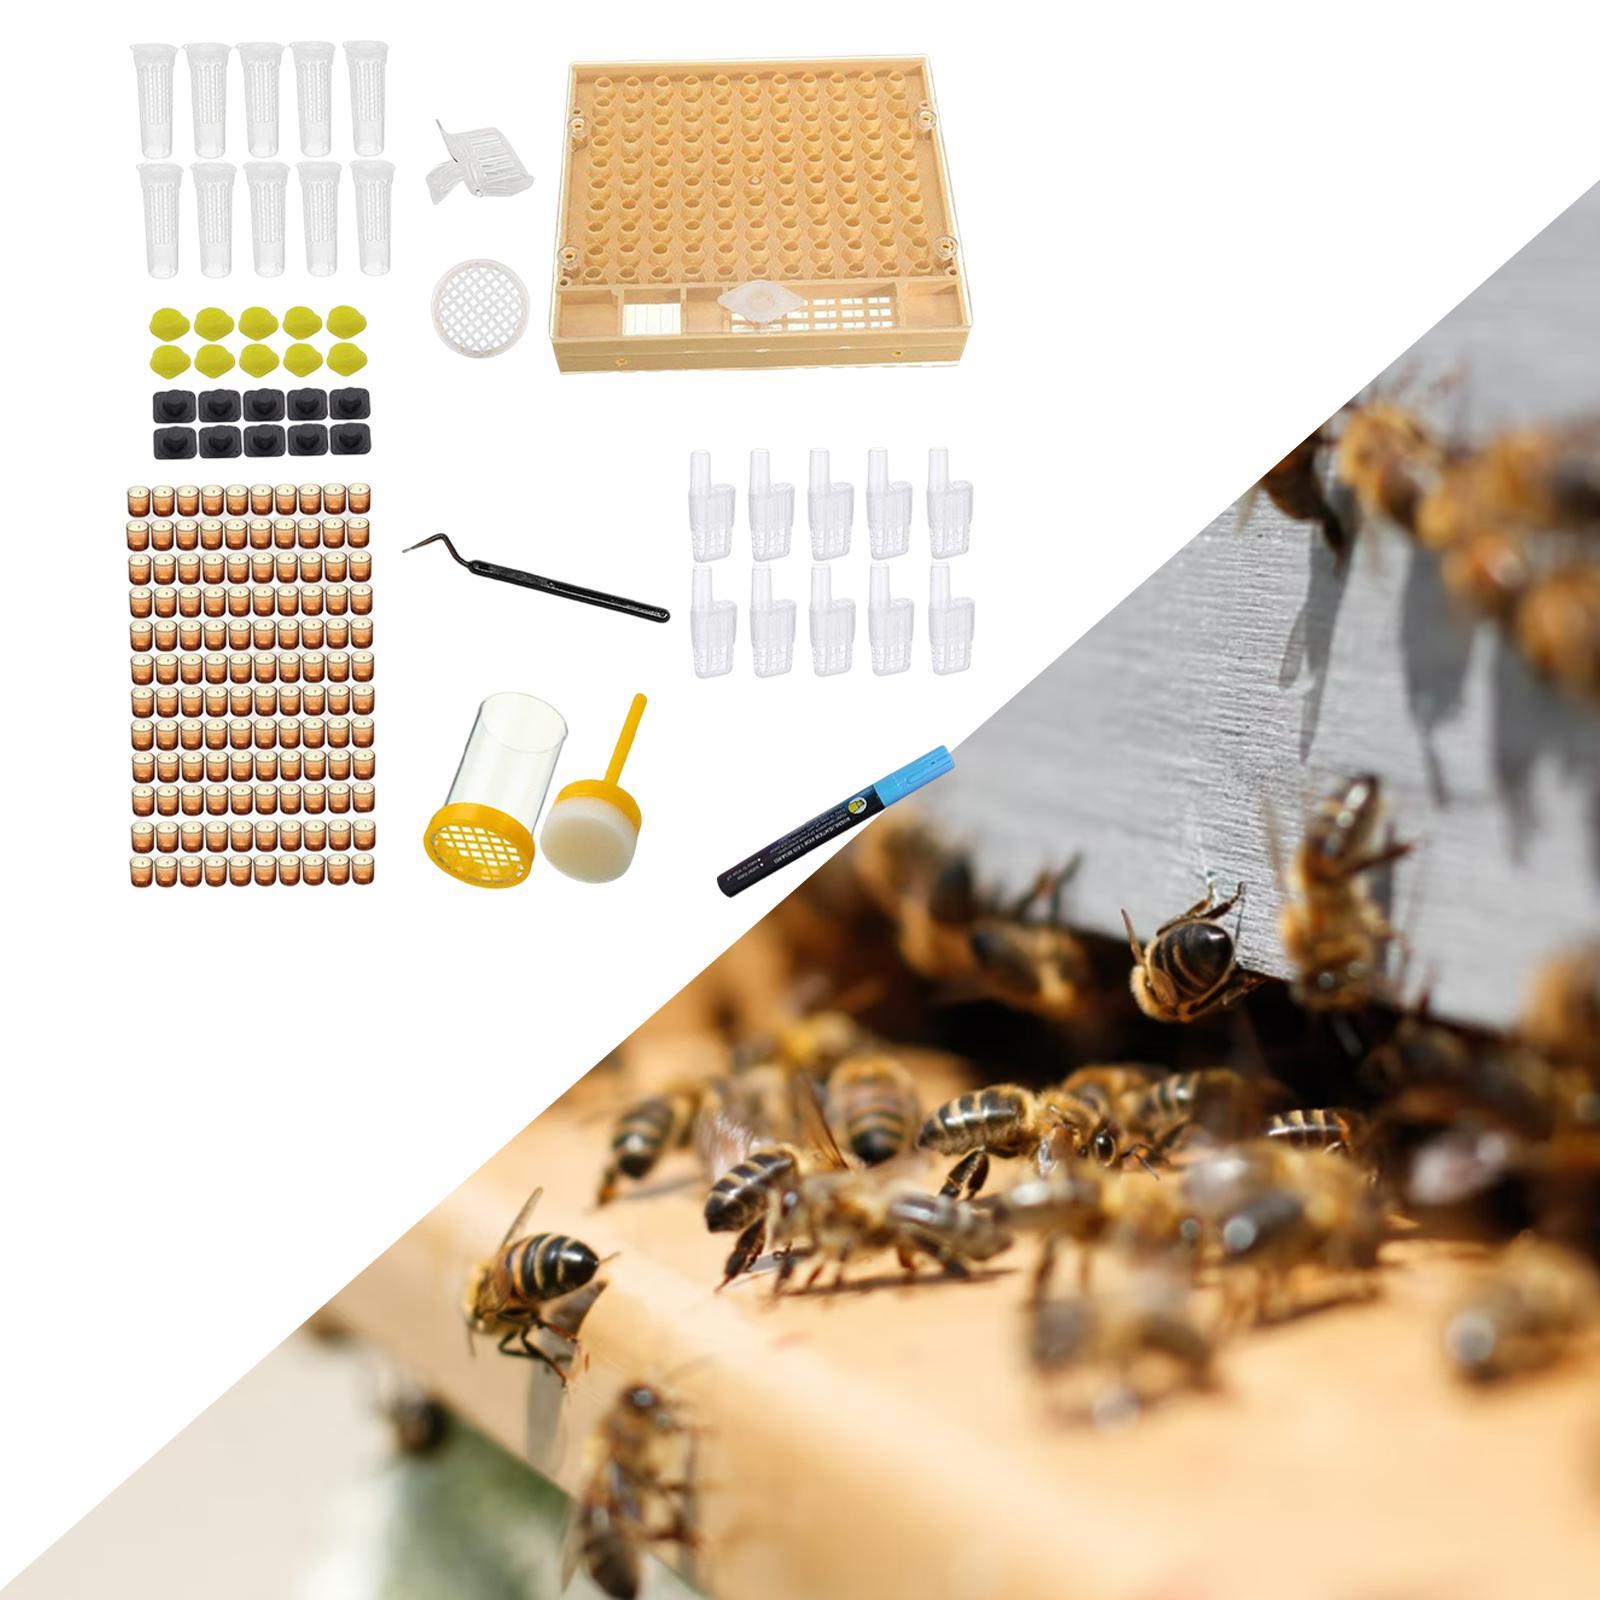 Queen Rearing Cup Kit for Apiculture Bees Tools Professional Convenient